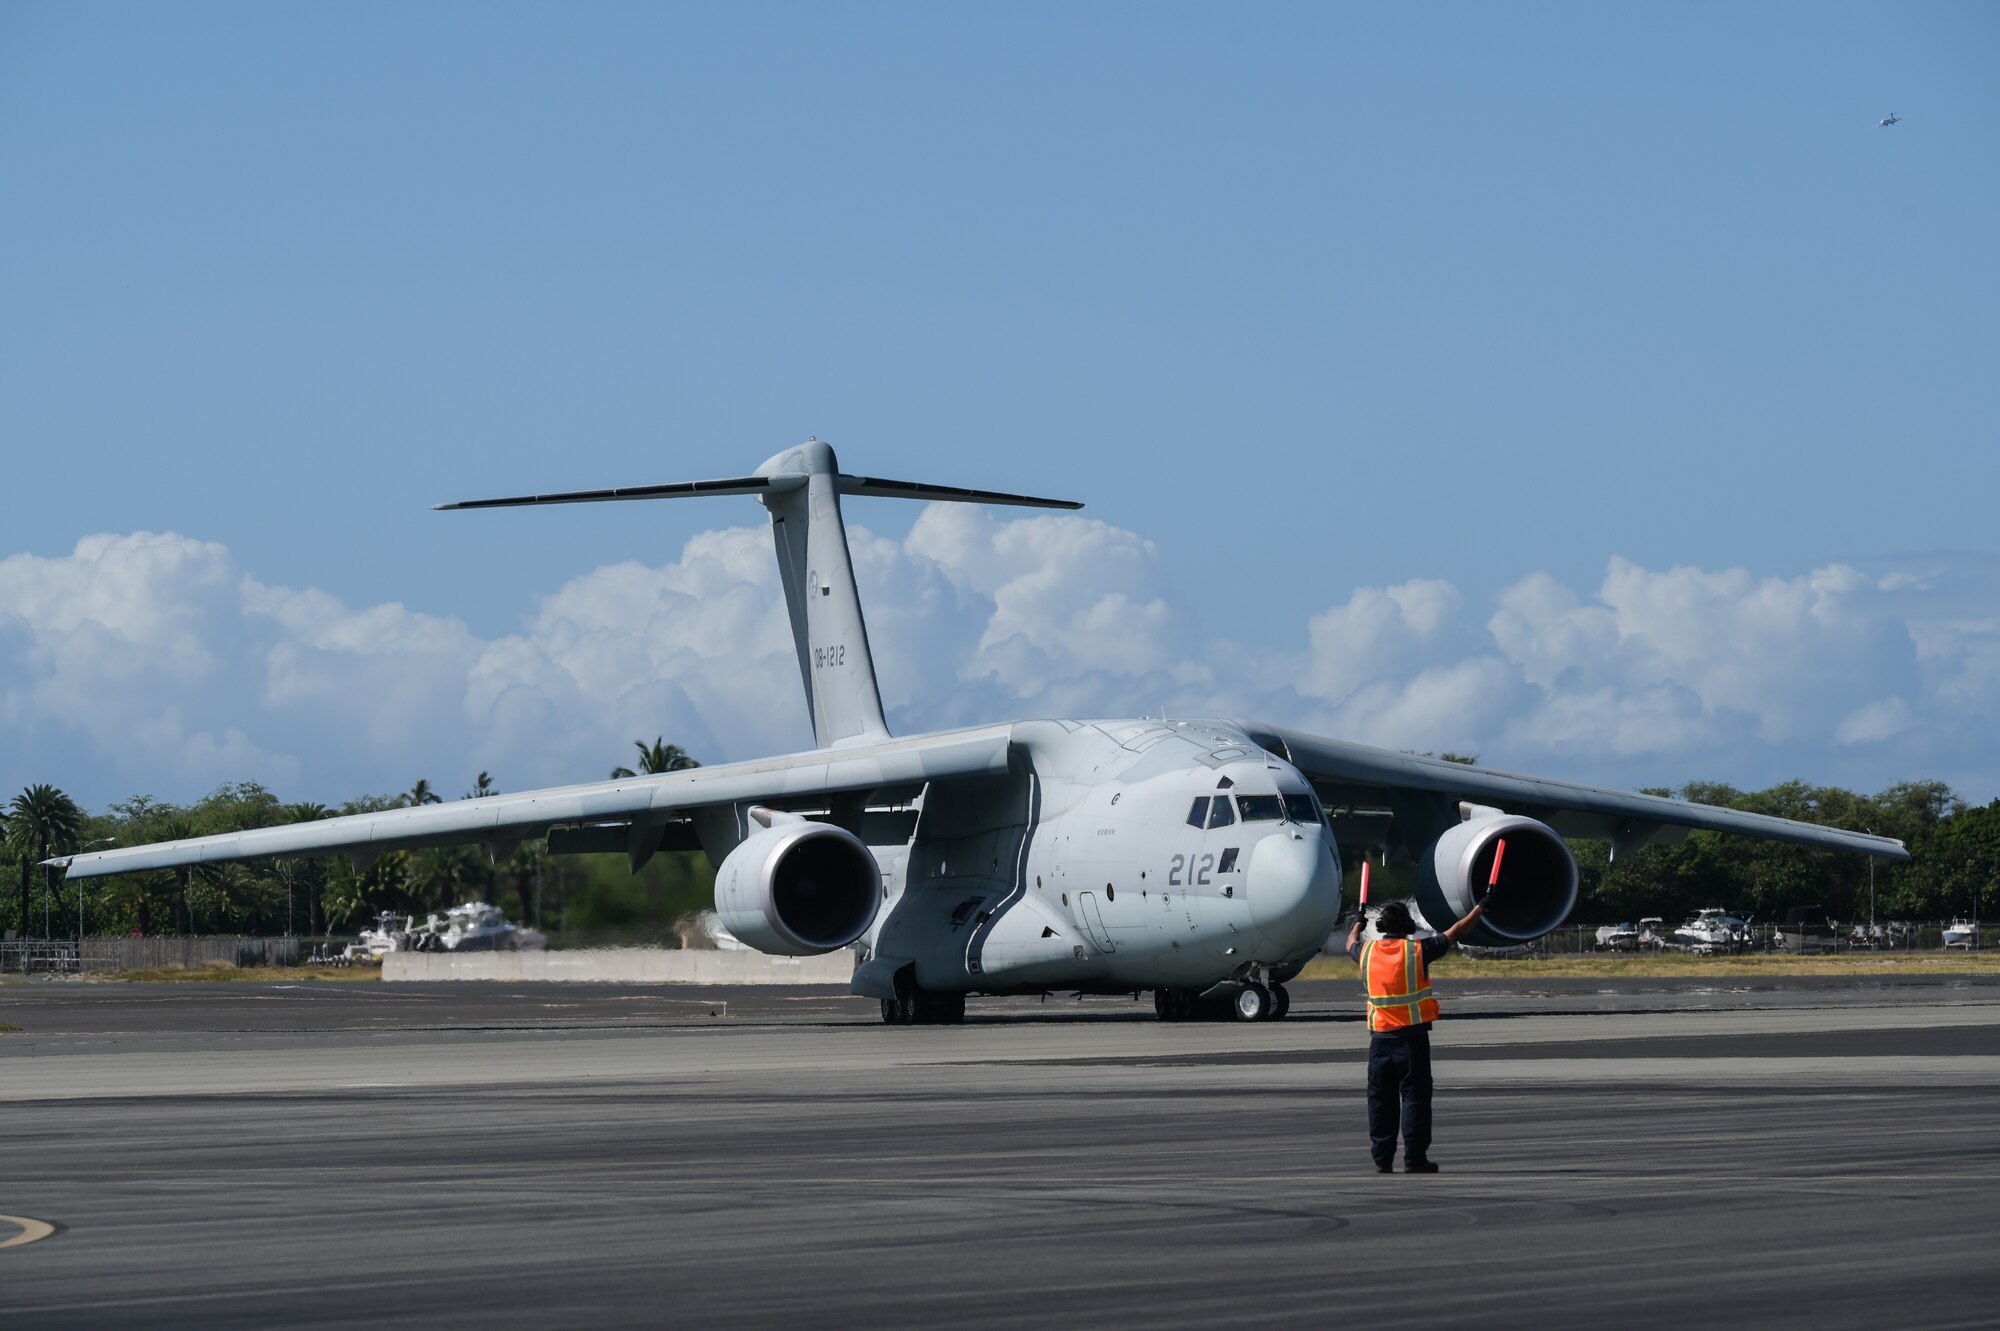 Kawasaki C-2 taxis on an airfield at Joint Base Pearl Harbor-Hickam, Hawaii, Sept. 25, 2022. The C-2, assigned to the JASDF 403rd Tactical Airlift Squadron, will be utilized during a 3-day bilateral exercise along with the 535th Airlift Squadron and the C-17 Globemaster III. Combined exercises between the USAF and JASDF advances the operational concepts and capabilities of both countries.  (U.S. Air Force photo by Staff Sgt. Alan Ricker)